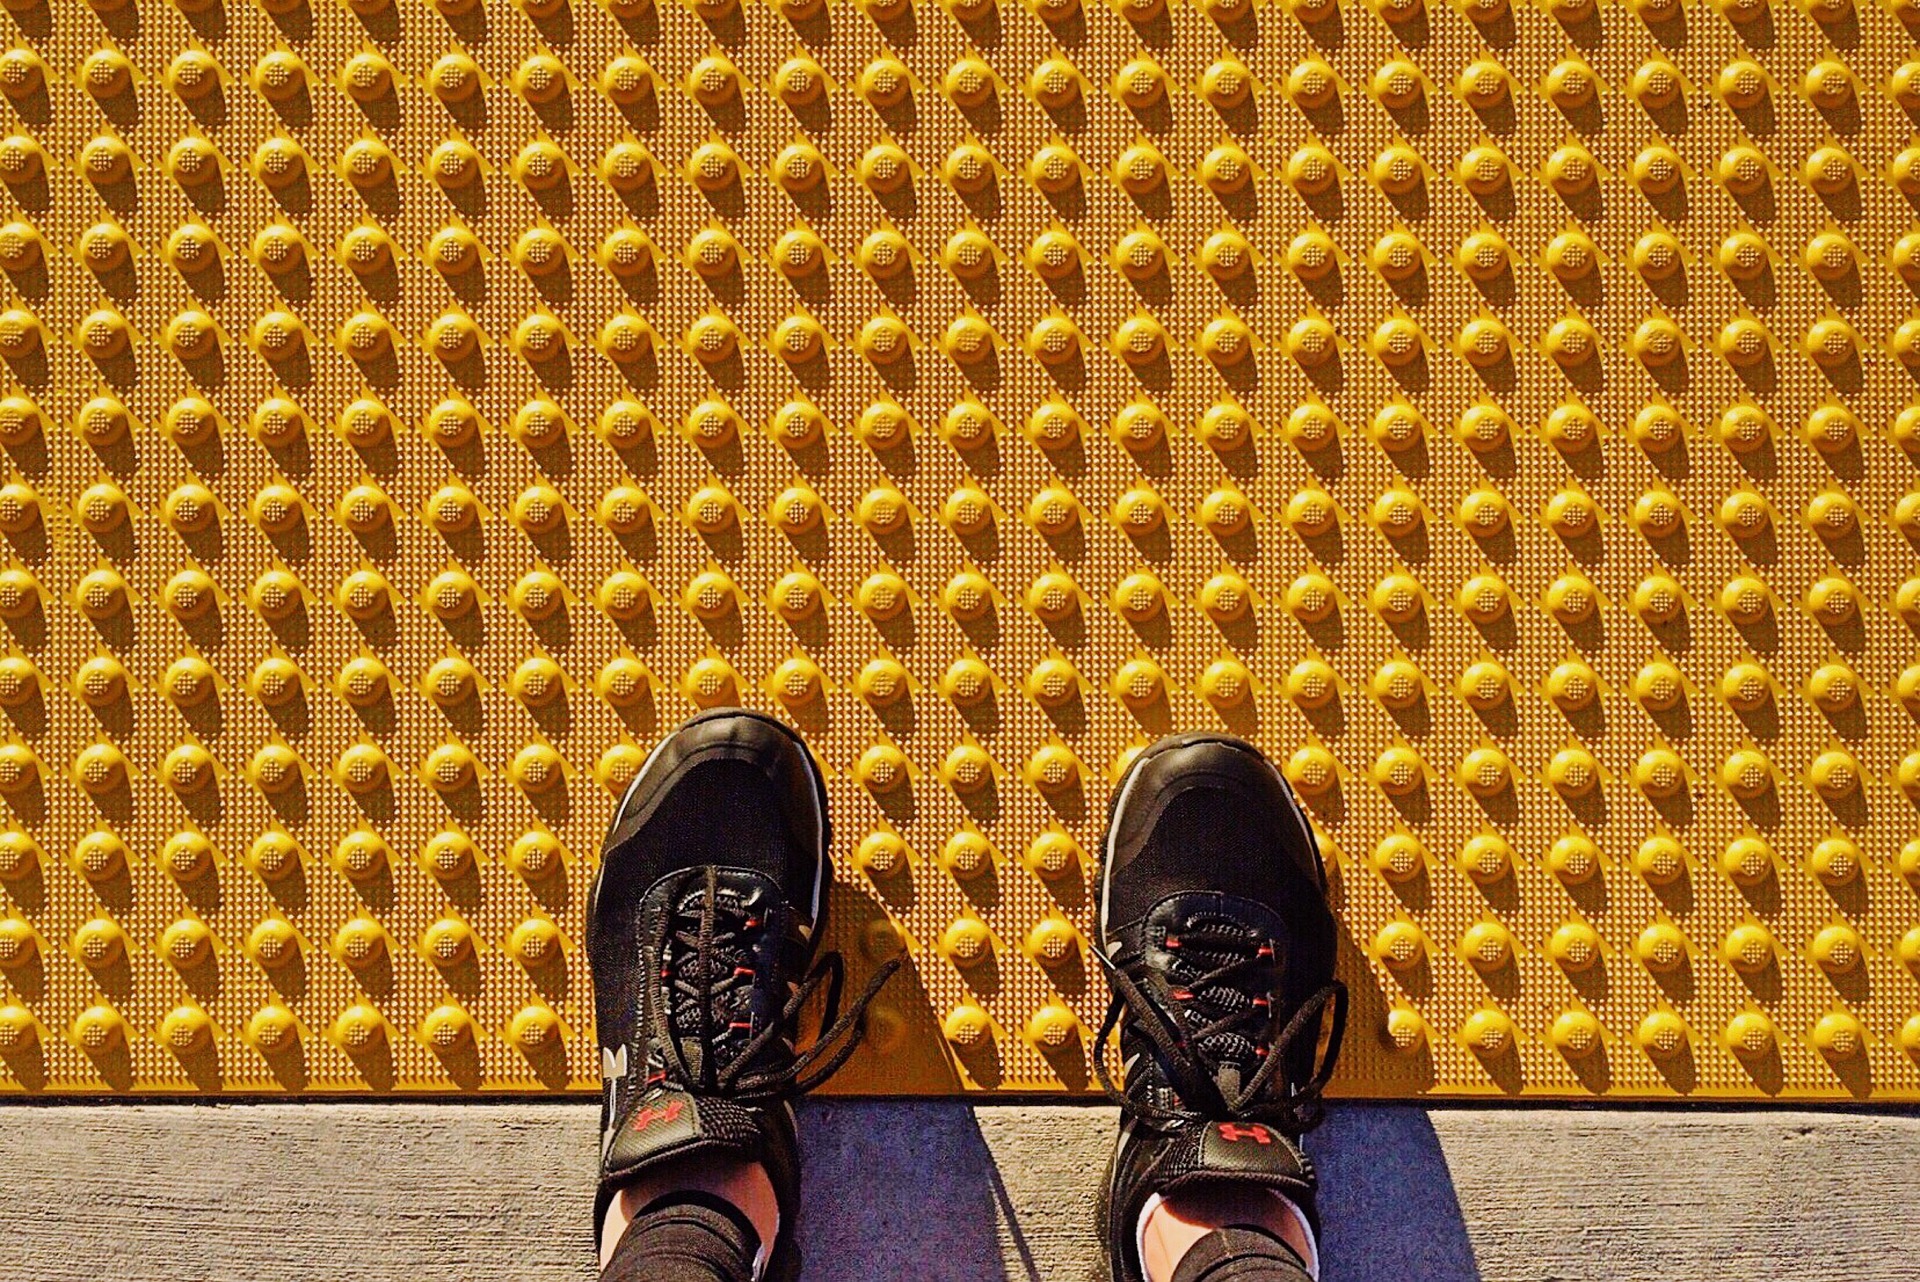 Foots on the yellow tactile pavement for visually impaired pedestrians.